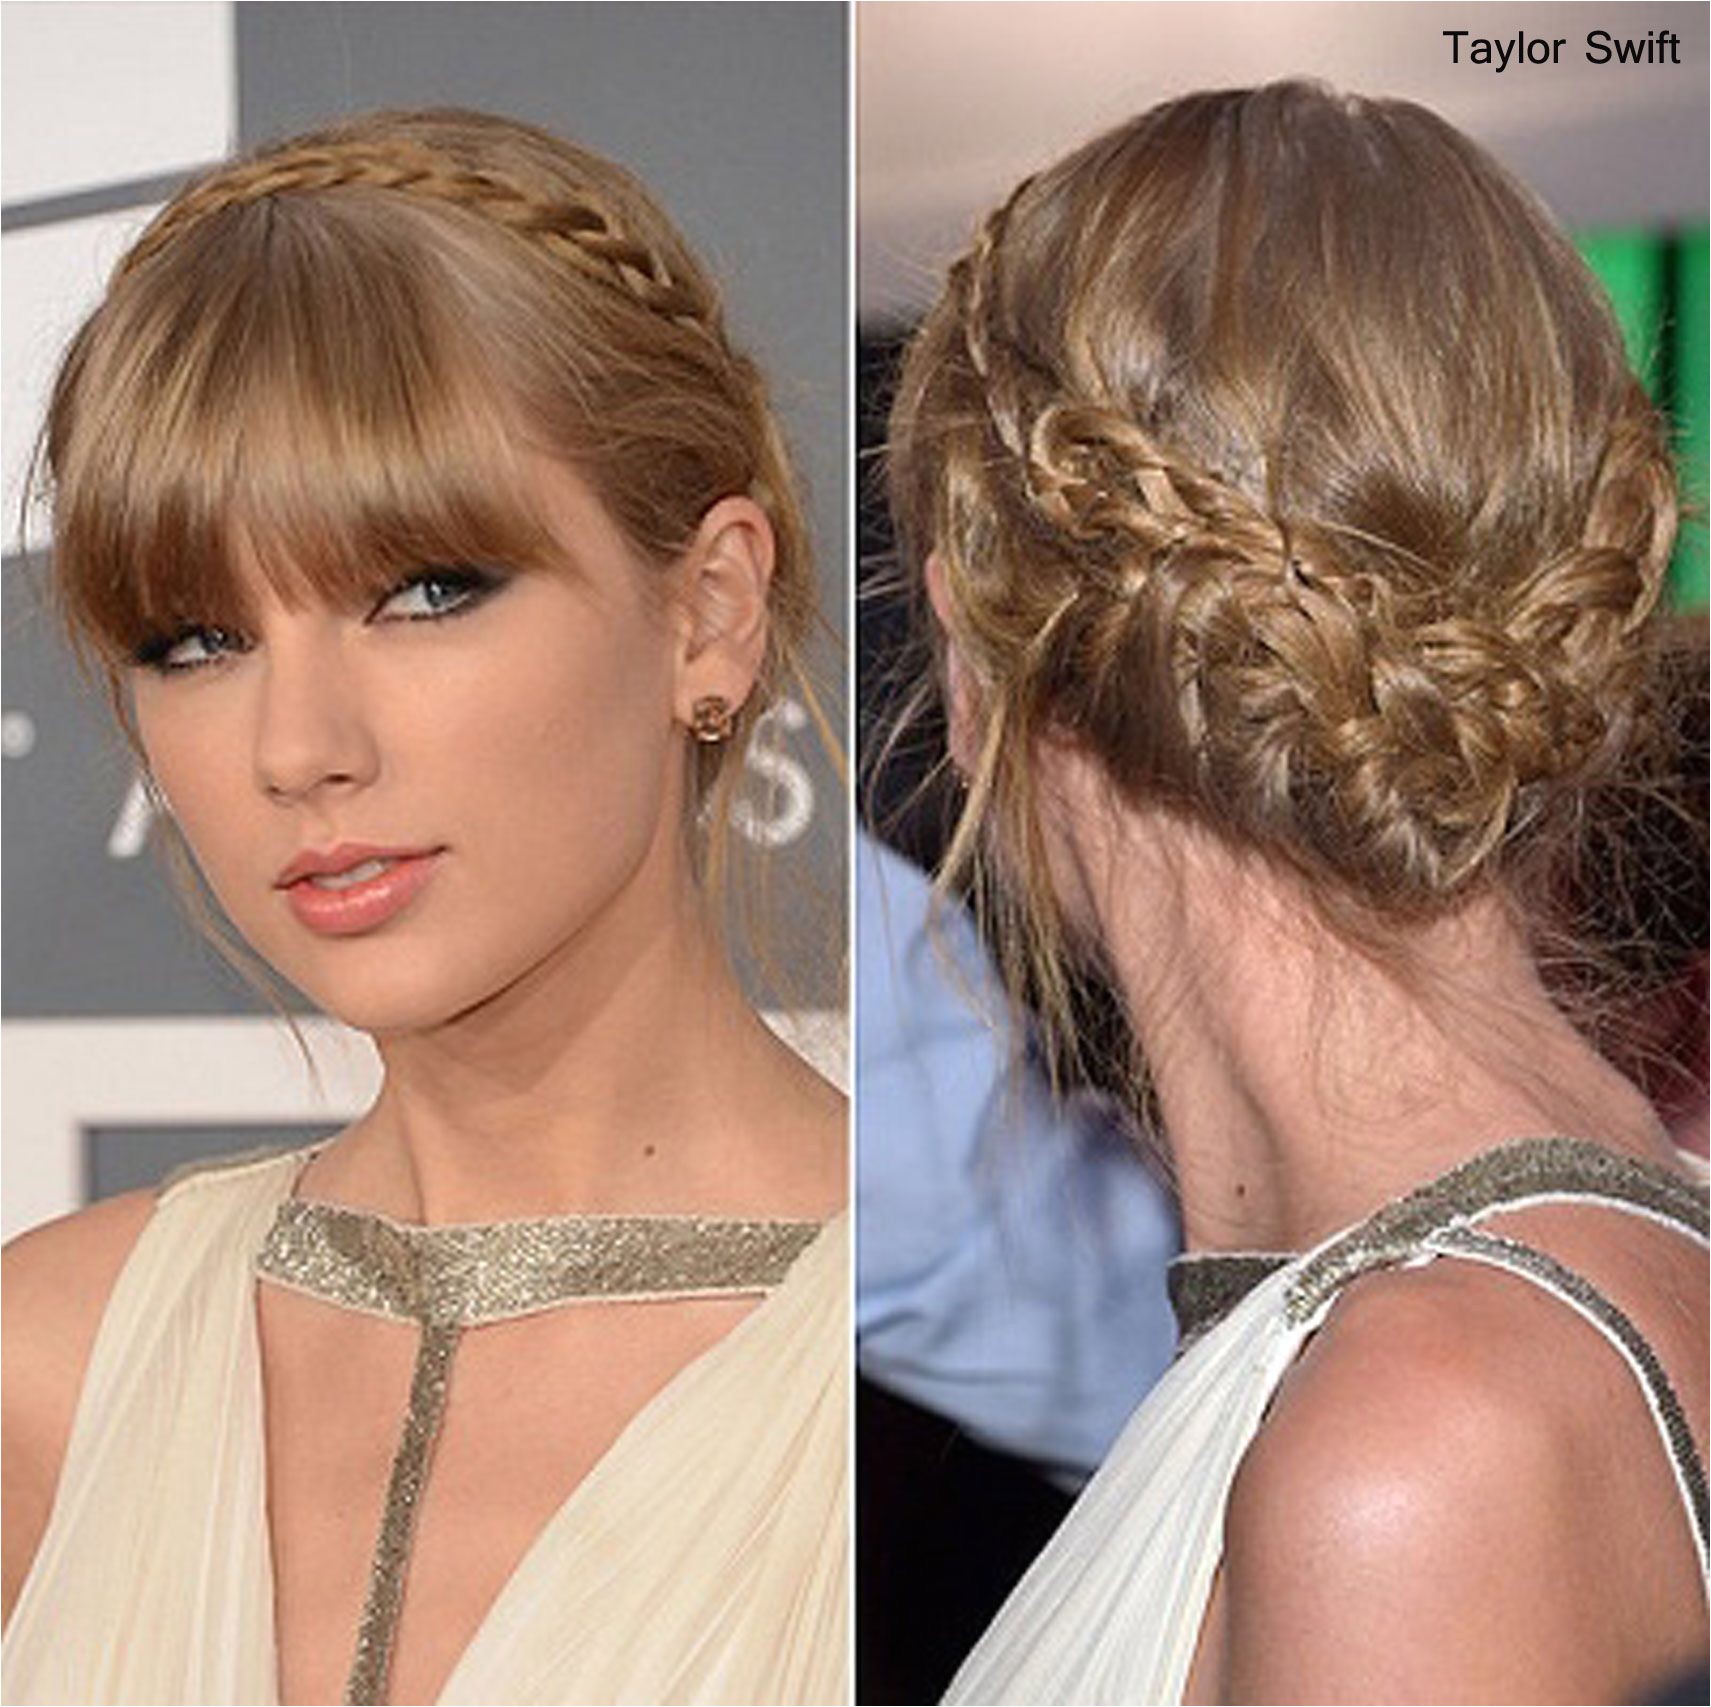 Hairstyle Taylor Swift